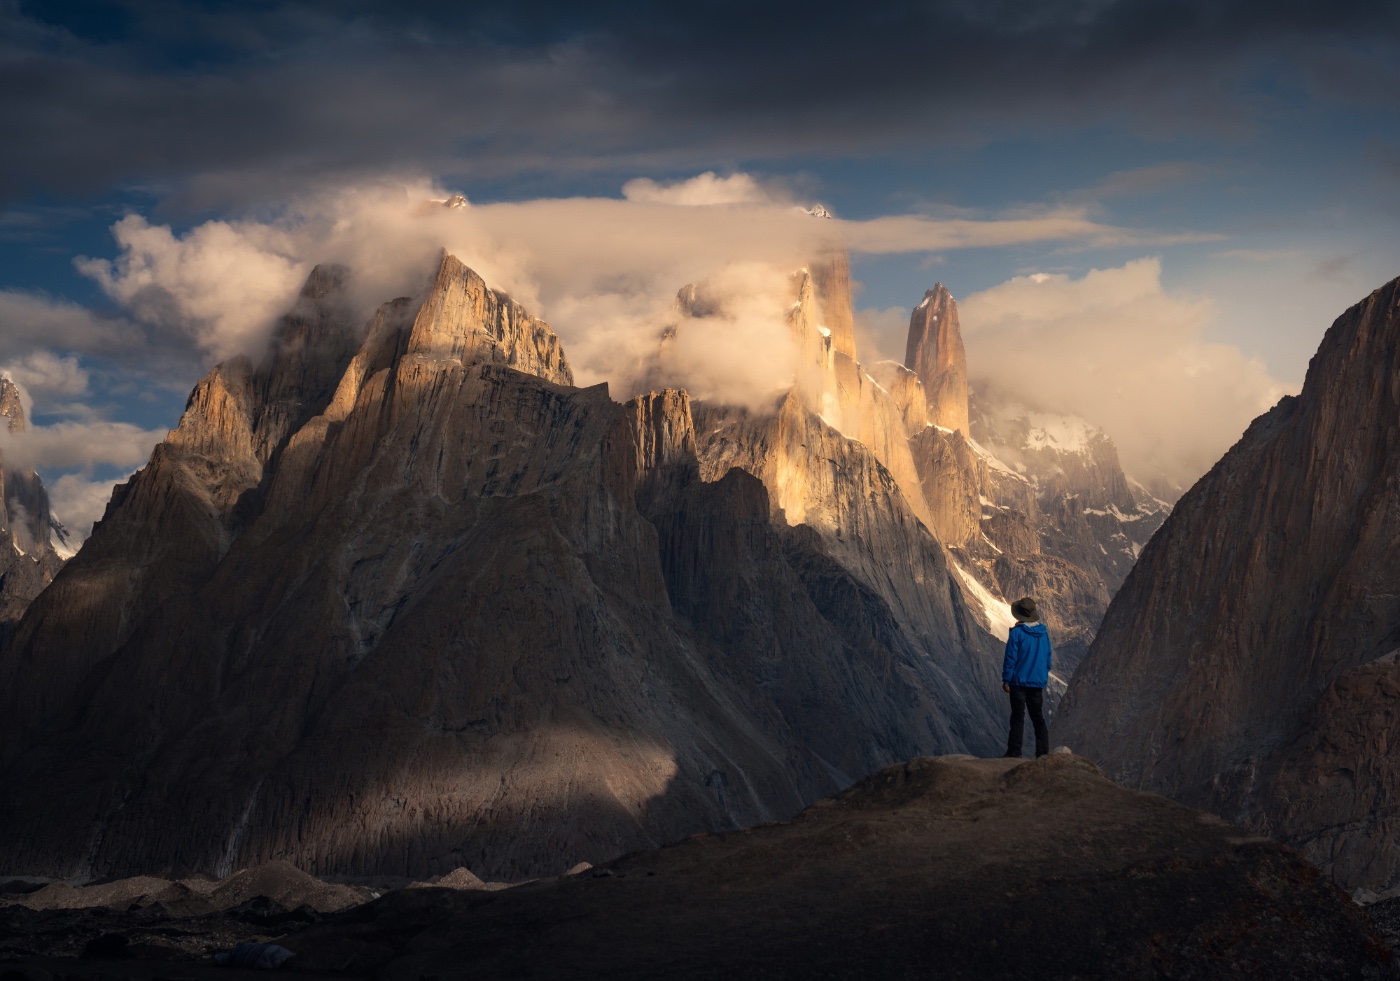 Trango-Towers-revealing-itself-from-the-mist-amid-showers.jpg